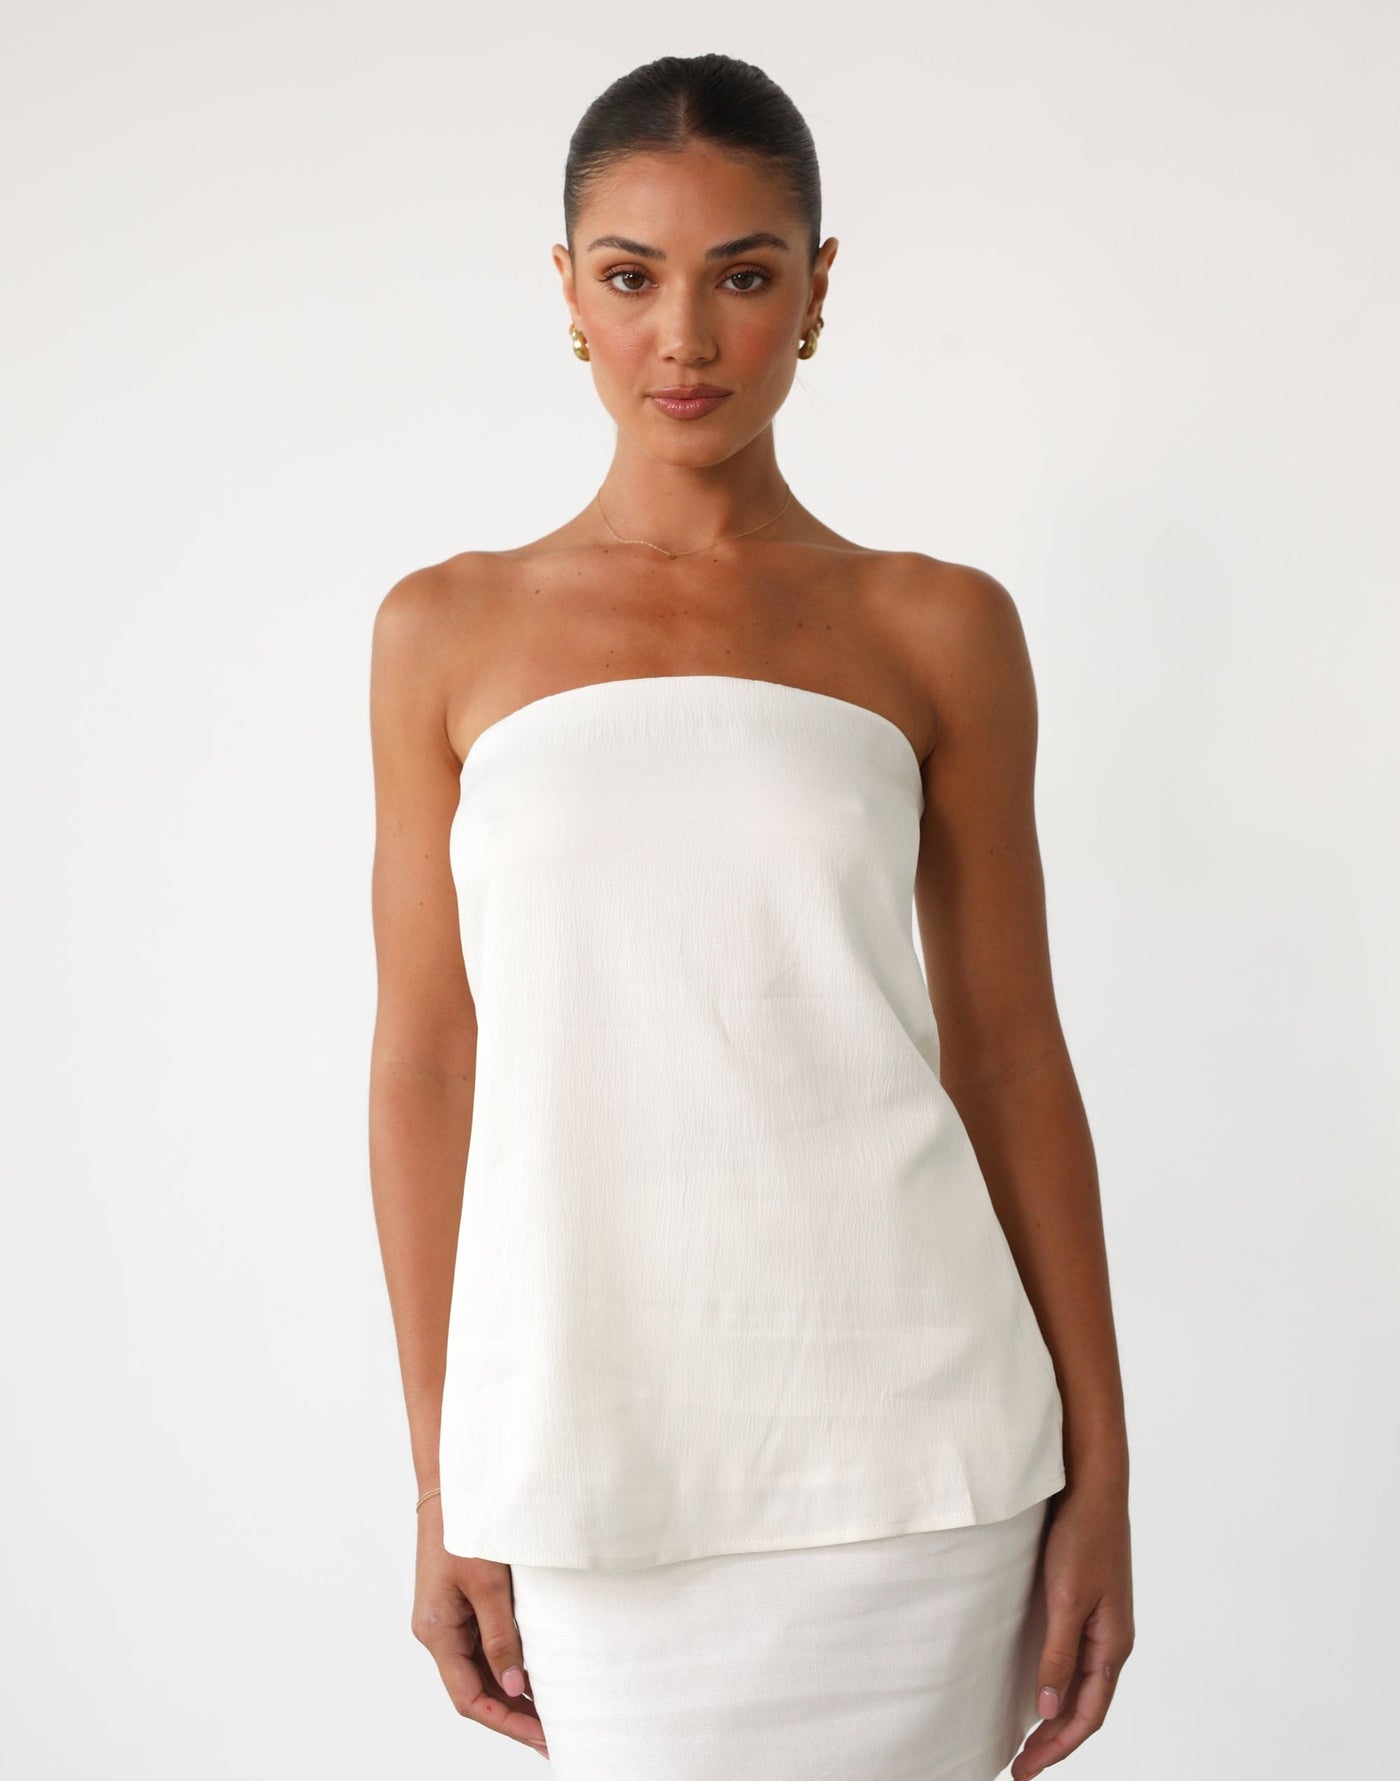 Elli Top (White) | Strapless Relaxed Fit Satin Top - Women's Top - Charcoal Clothing